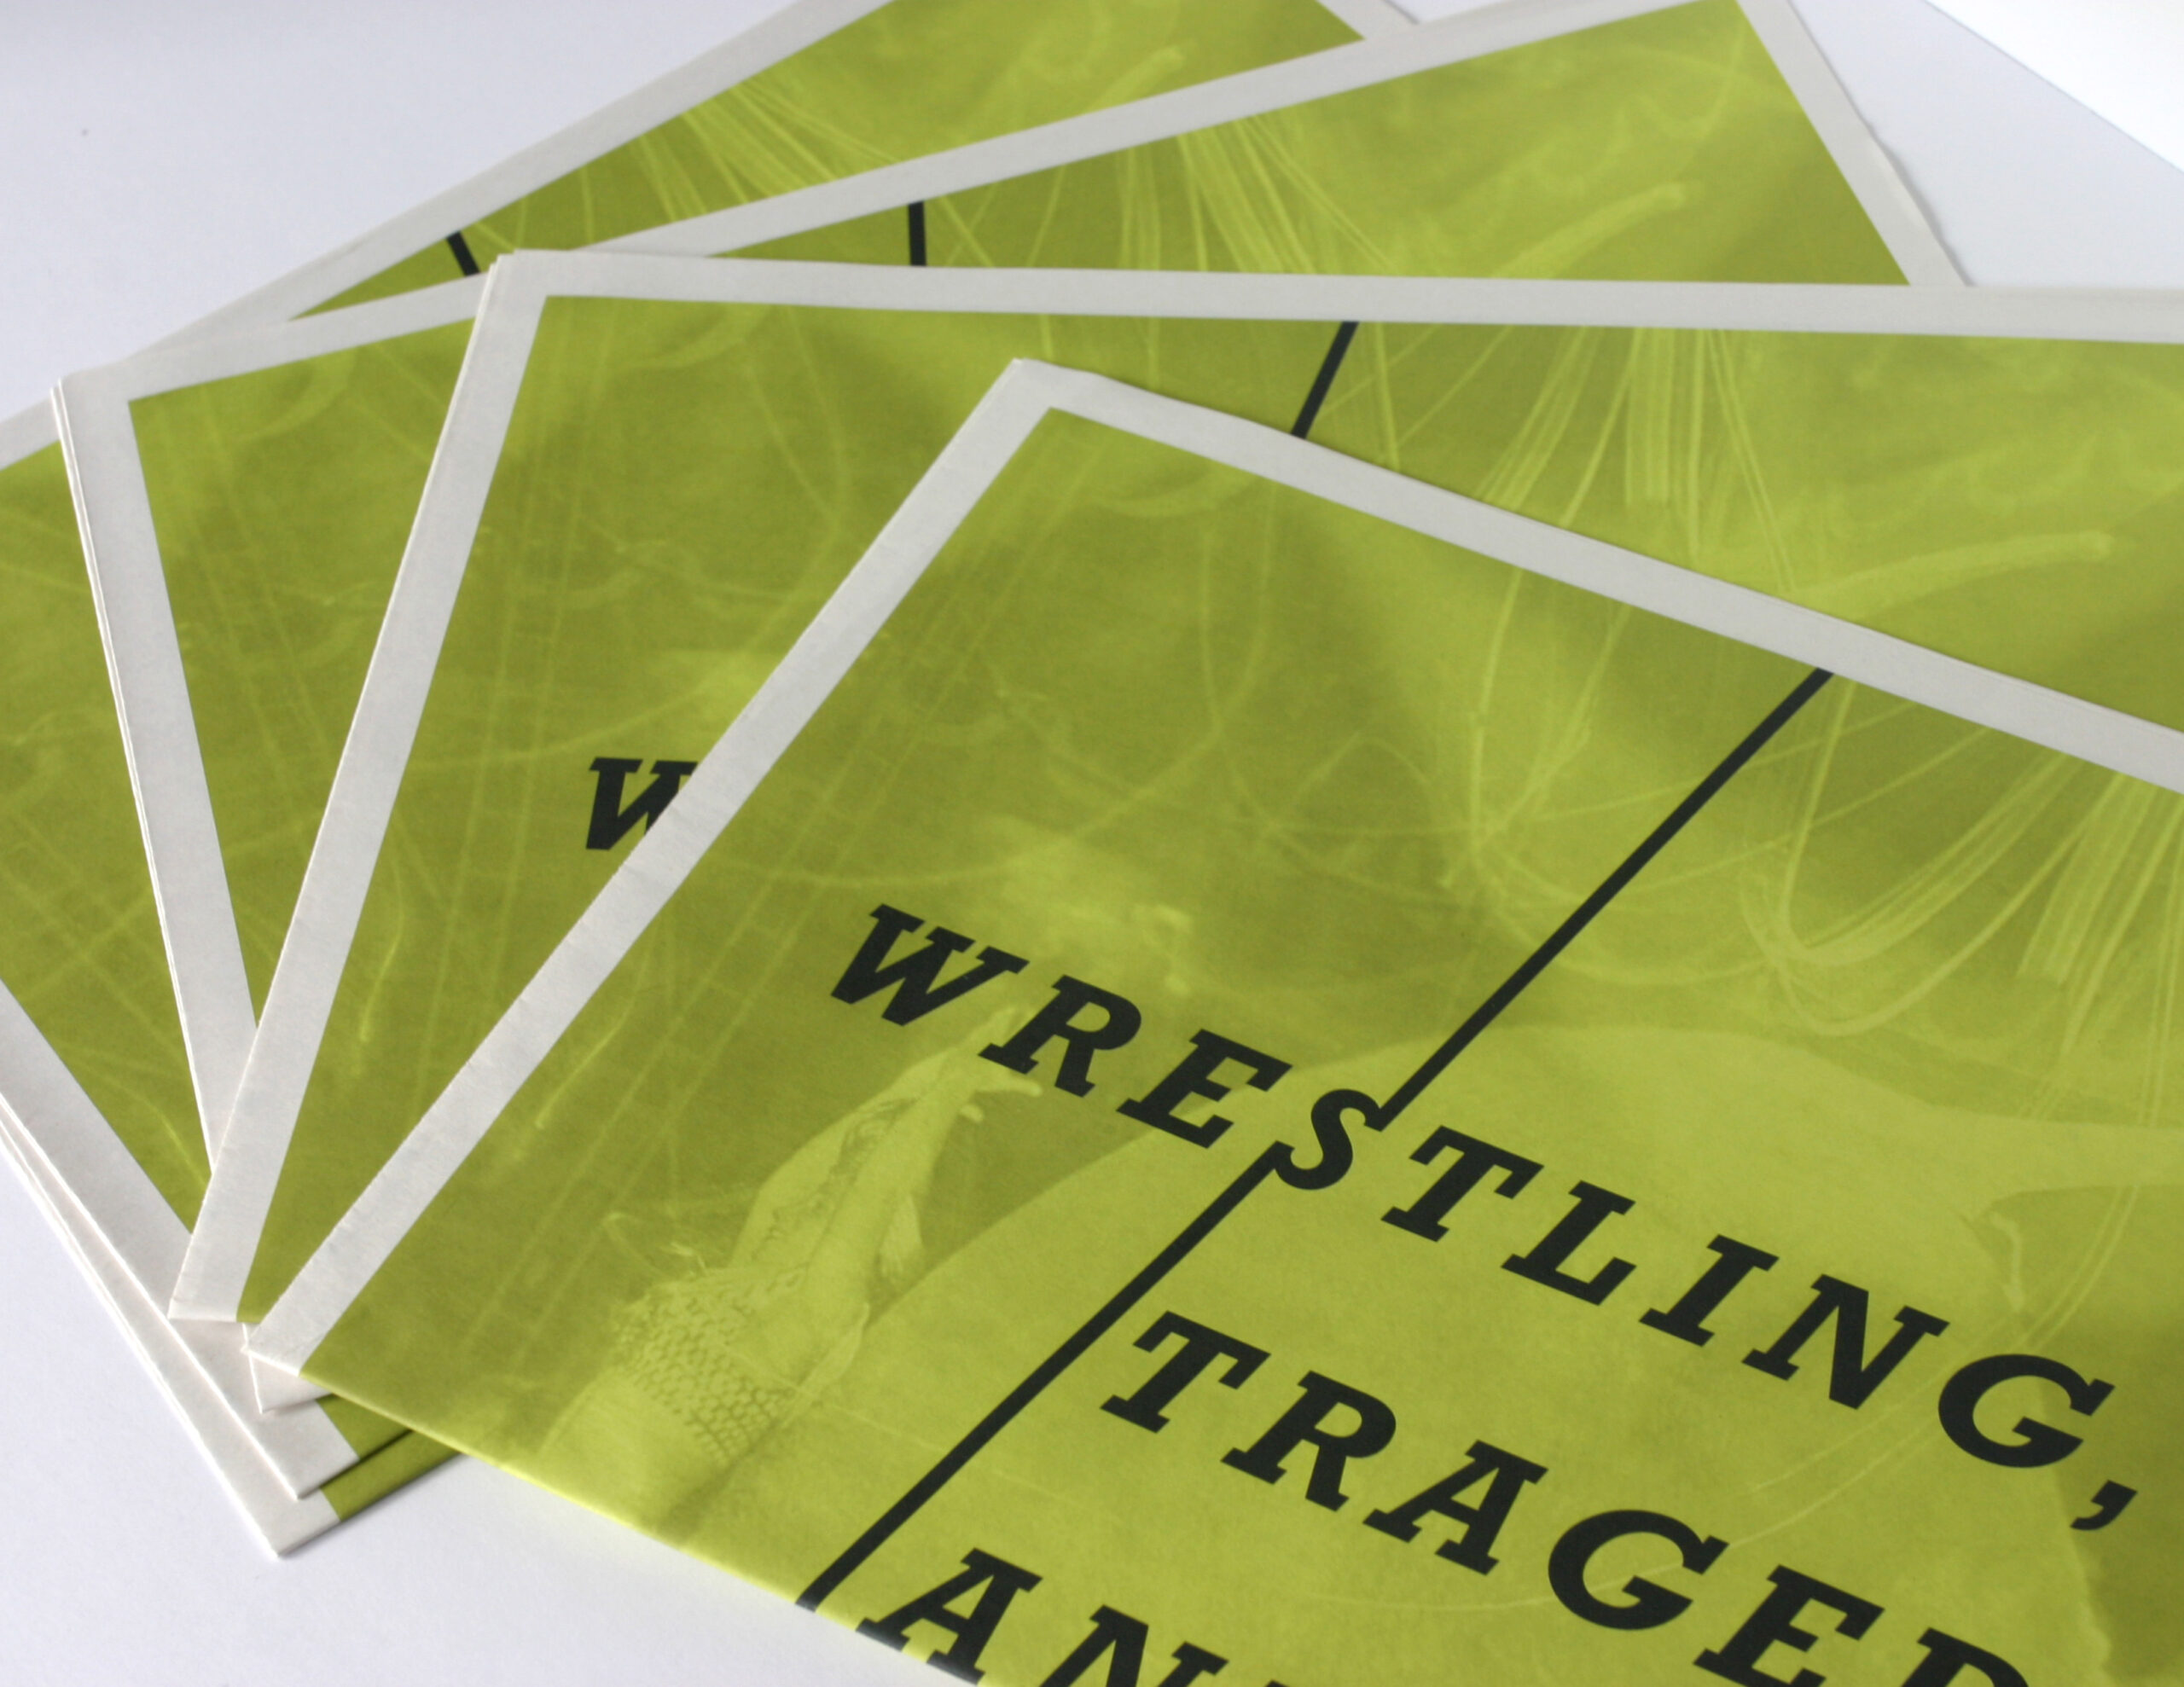 Wrestling, Tragedy, and the Circus